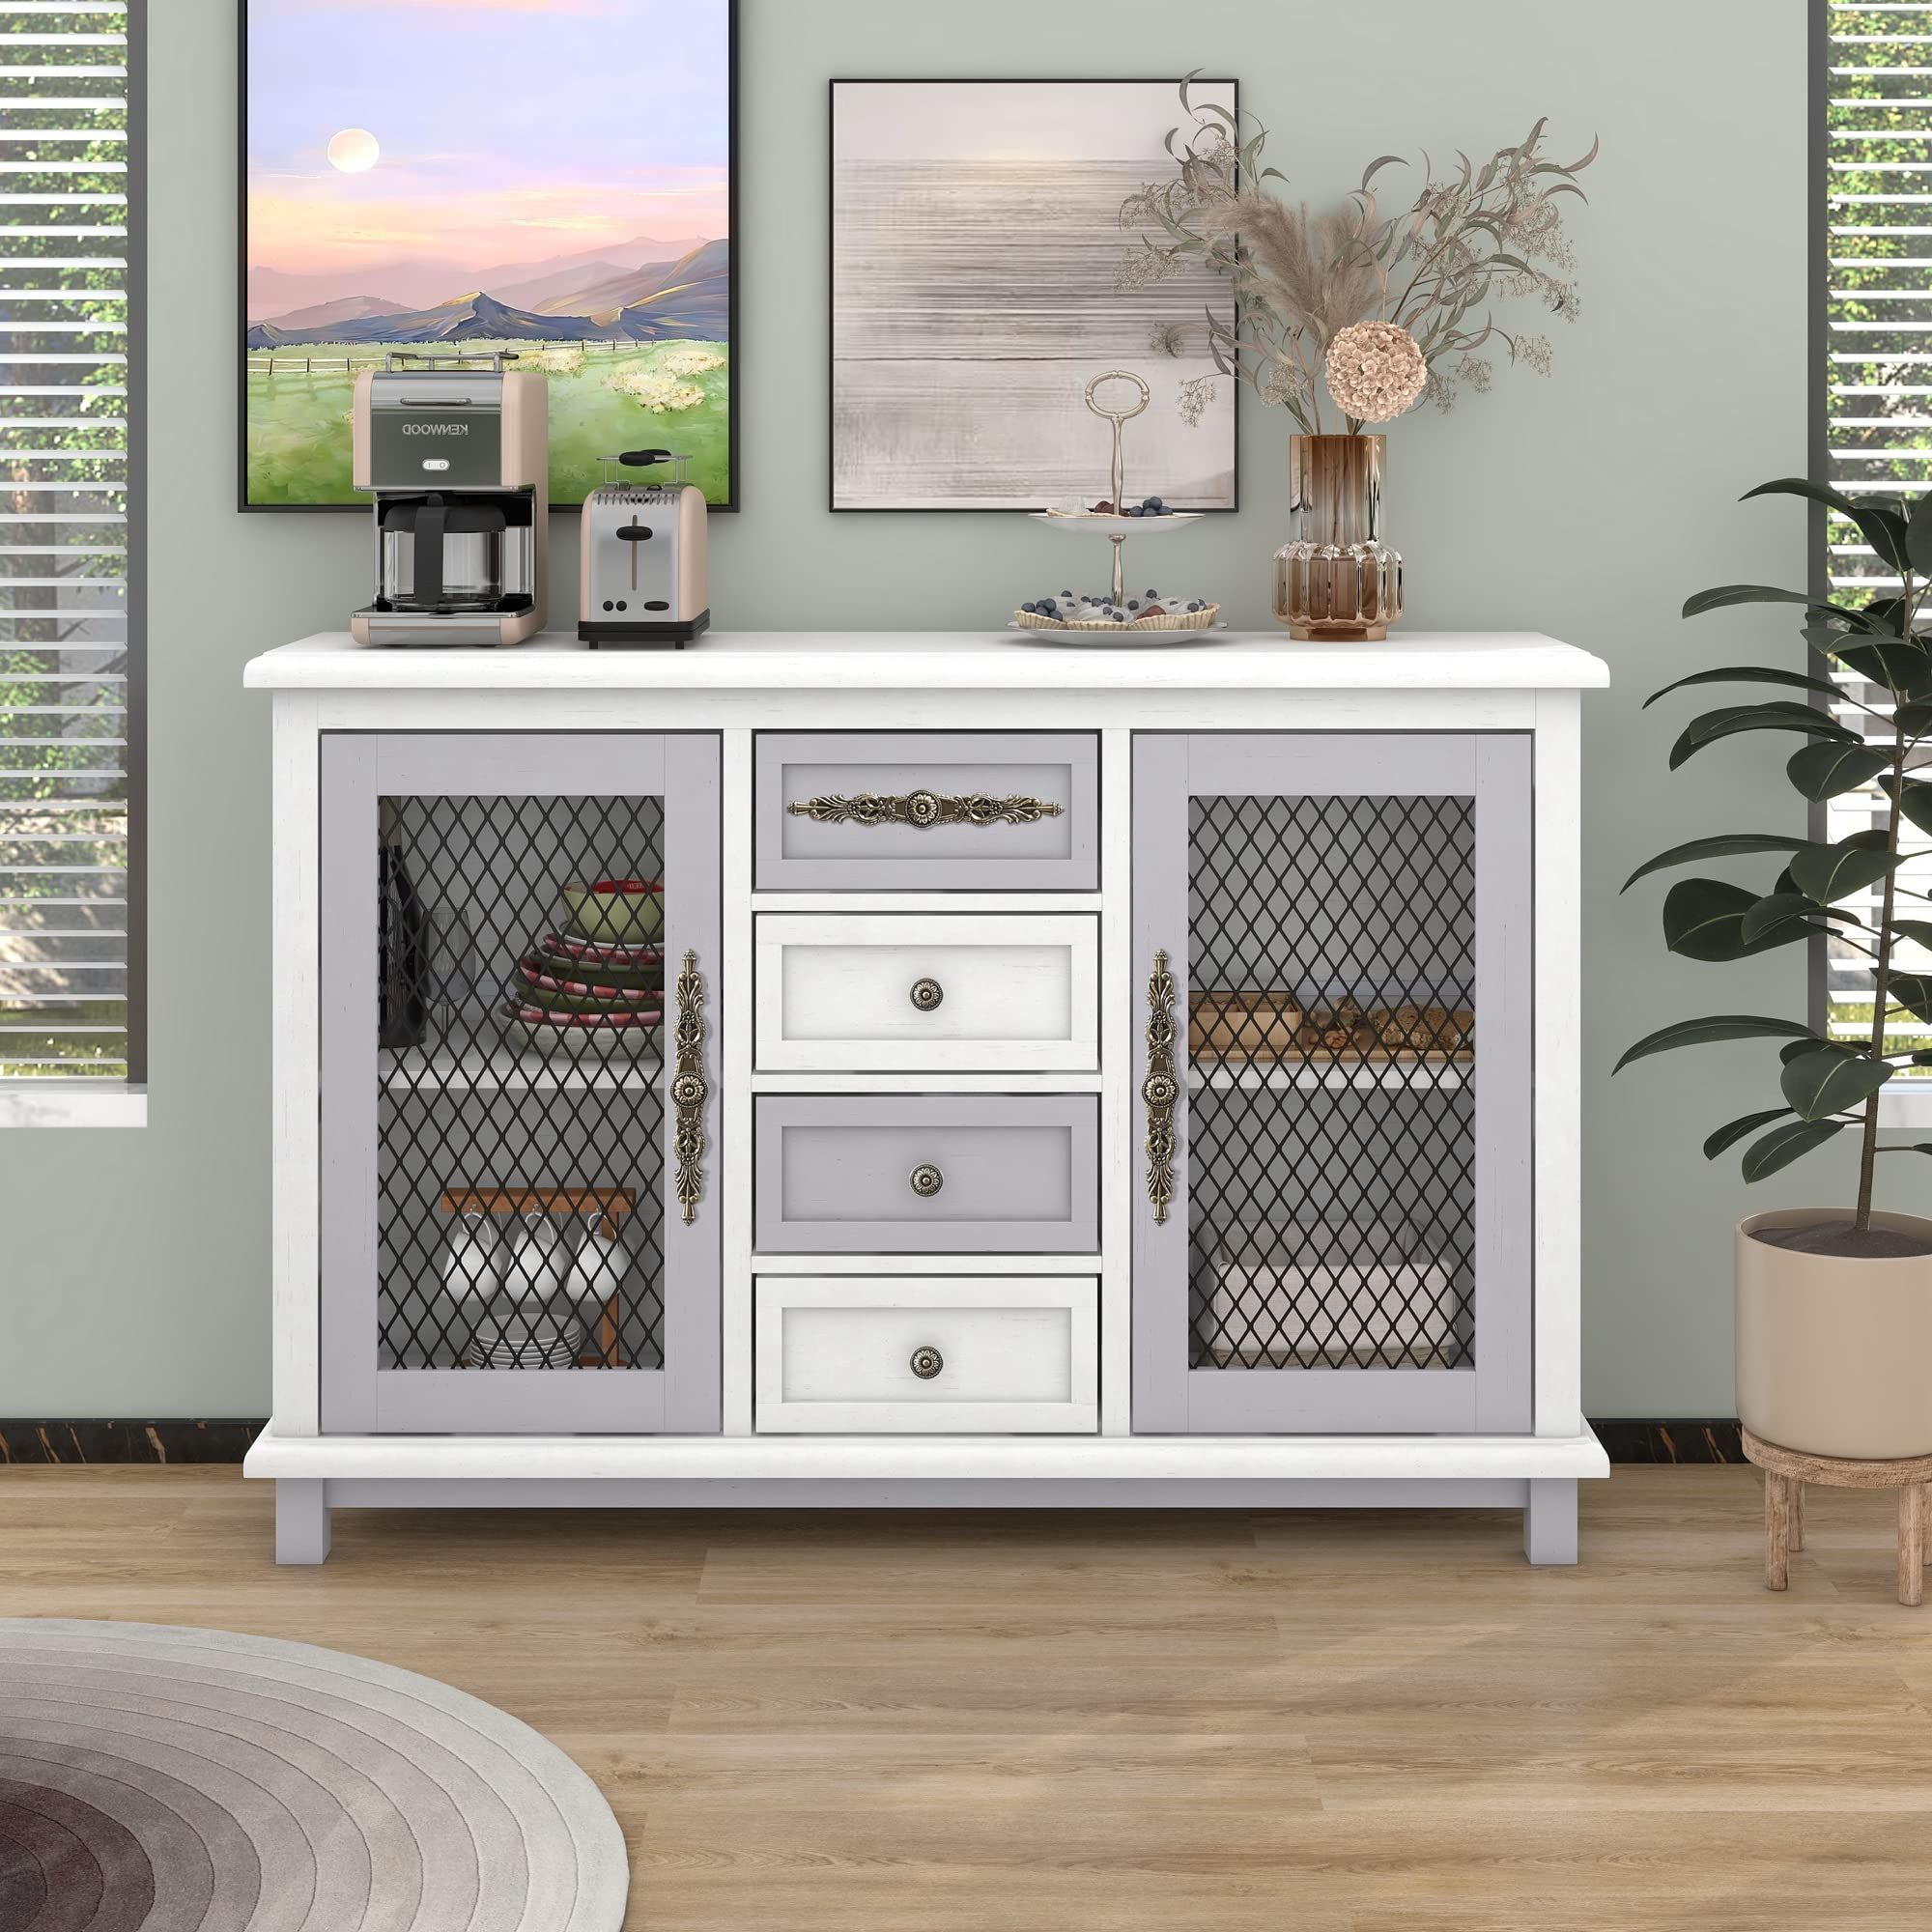 Amazon: Merax Retro Style Cabinet With 4 Drawers Of The Same Size And 2  Iron Mesh Doors For Living Room And Entryway,functional Sideboard, White 3  : Home & Kitchen With 2019 Sideboards With Breathable Mesh Doors (View 2 of 10)